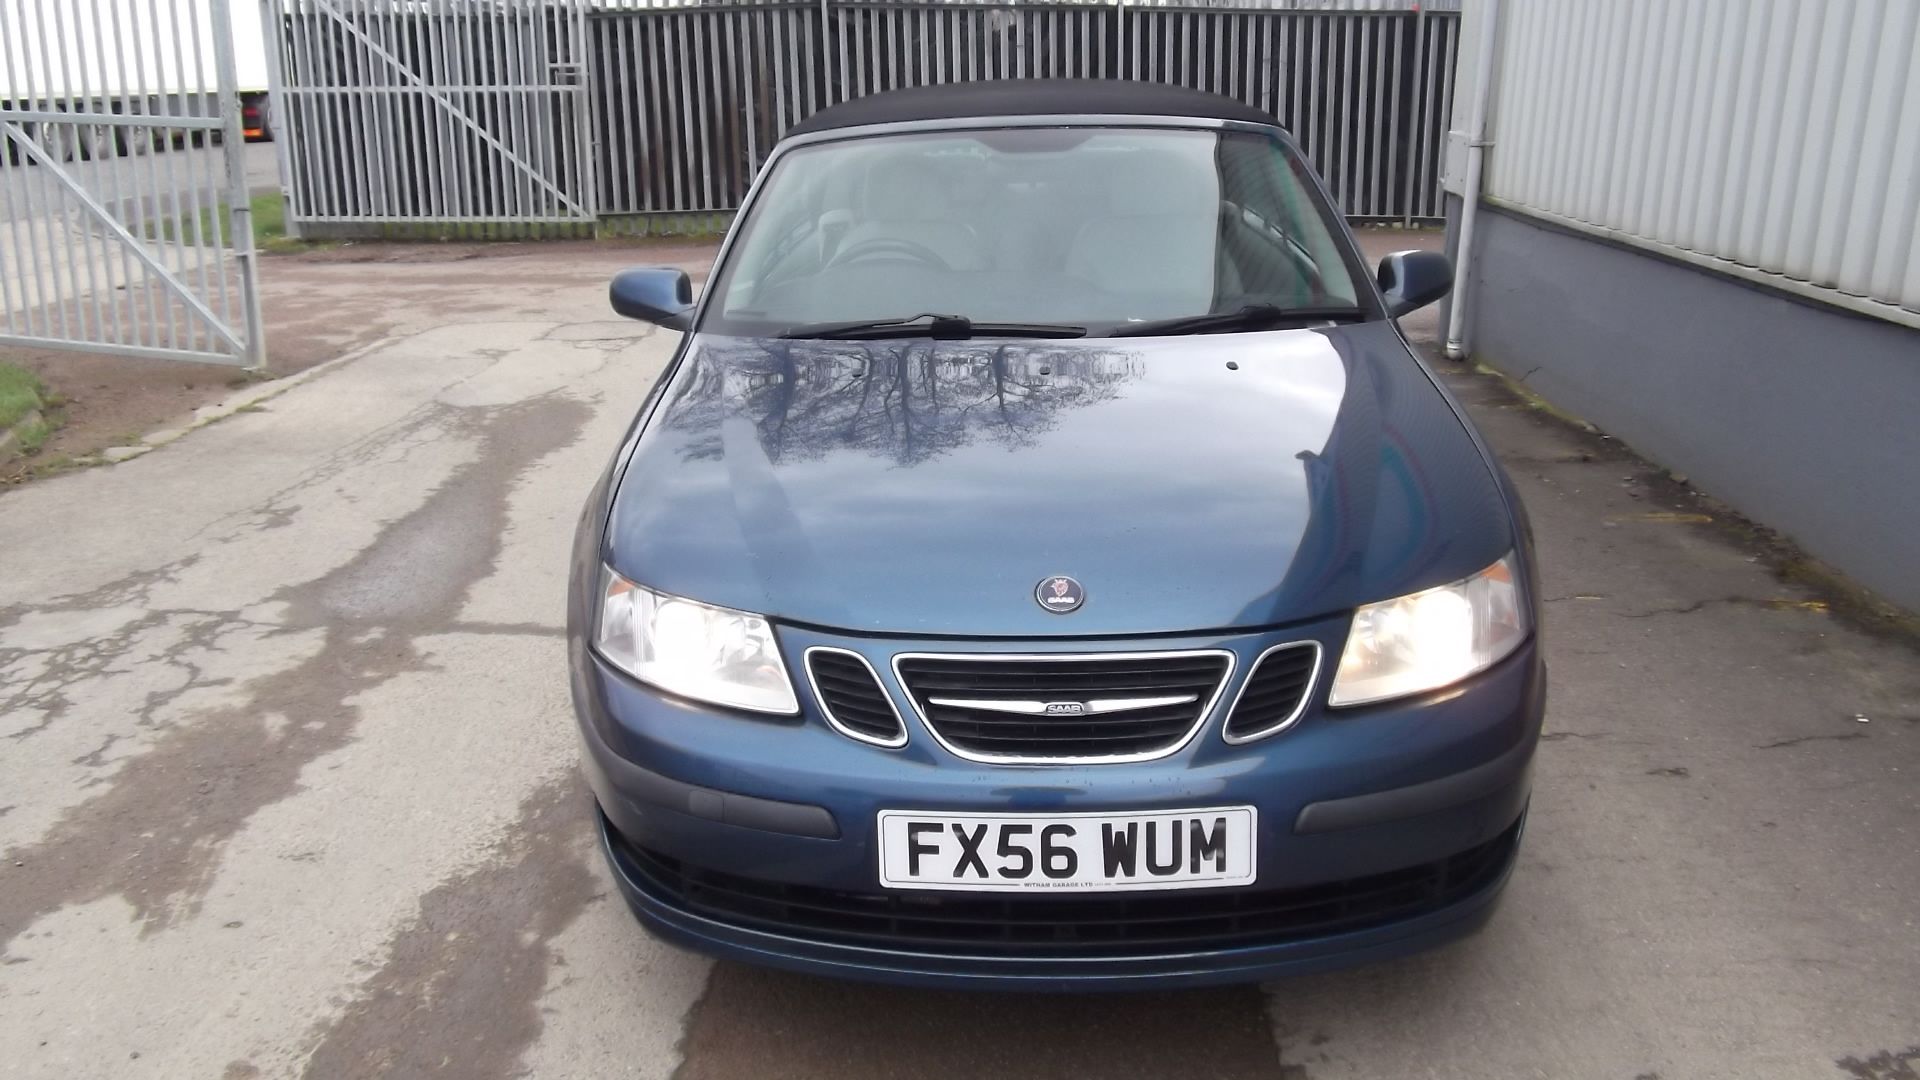 2006 Saab 9-3 Linear 150 Bhp 2.0 3Dr Convertible - FSH - CL505 - NO VAT ON THE HAMM - Image 14 of 19